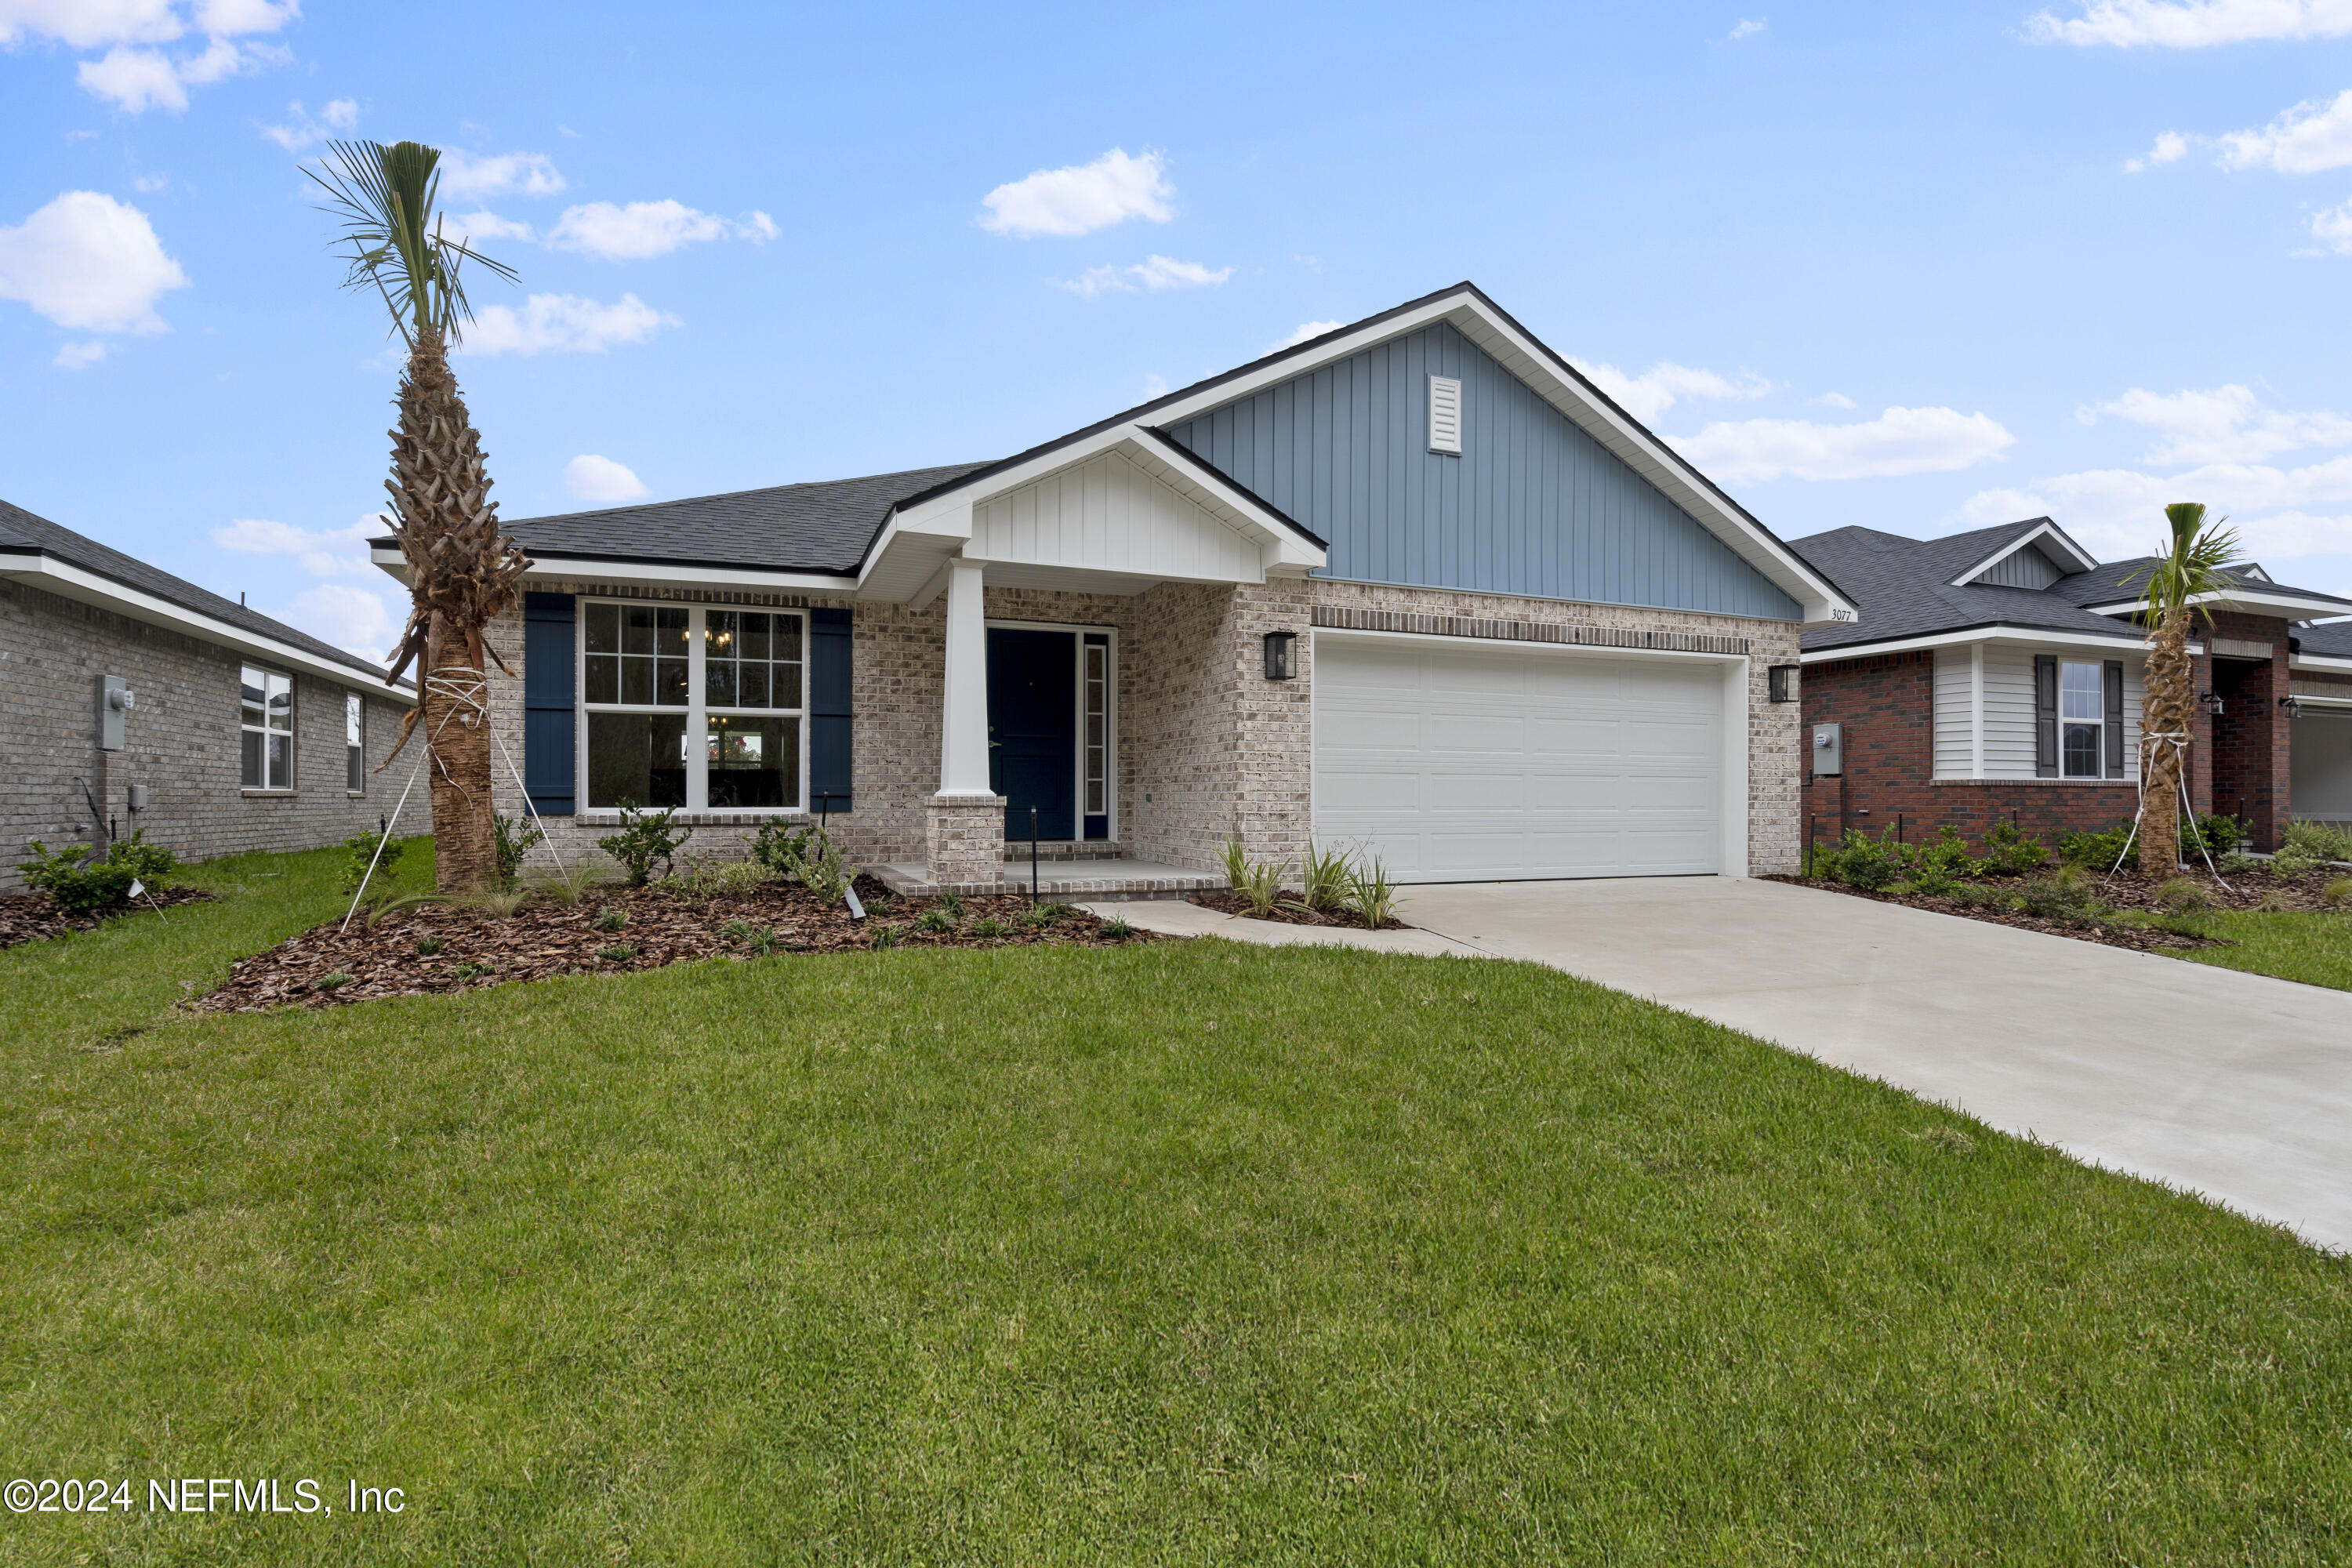 Green Cove Springs, FL home for sale located at 3113 LAUREL SPRINGS Drive, Green Cove Springs, FL 32043